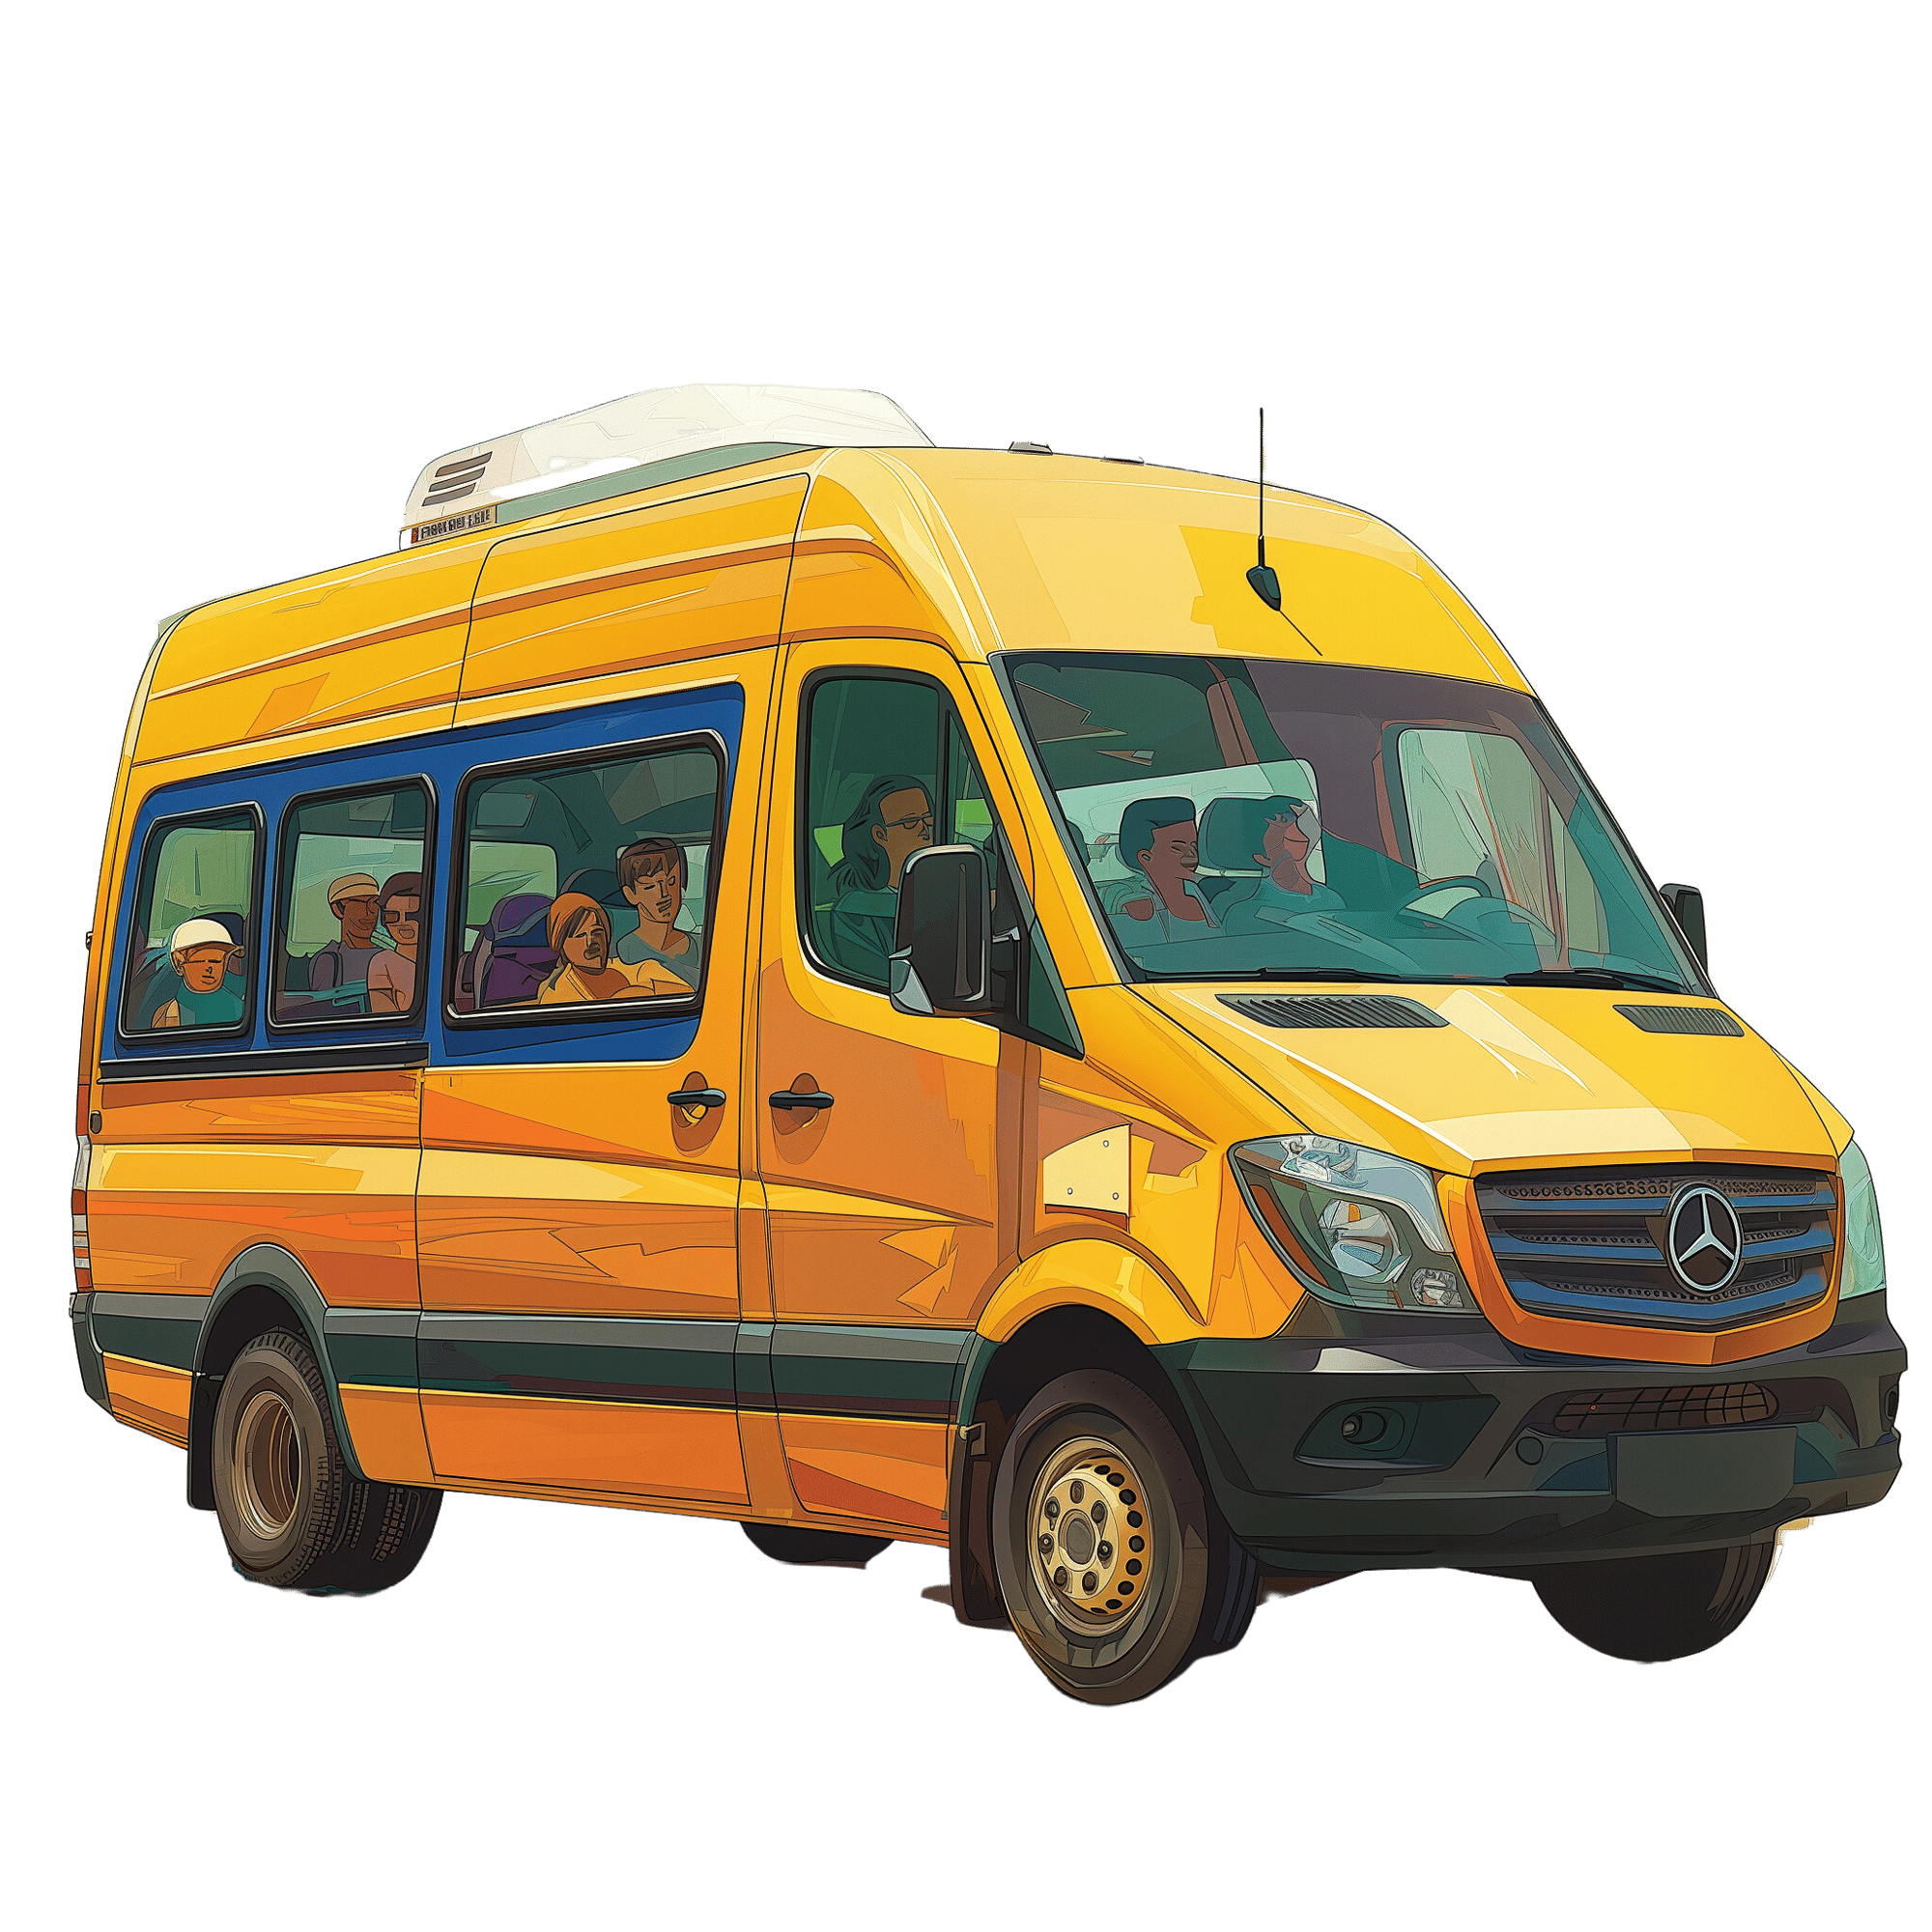 arothkegel_modern_school_van_front_view_with_kids_inside_and_ar_00922c17-ff47-48d2-b4ac-e70716c5107d - Edited